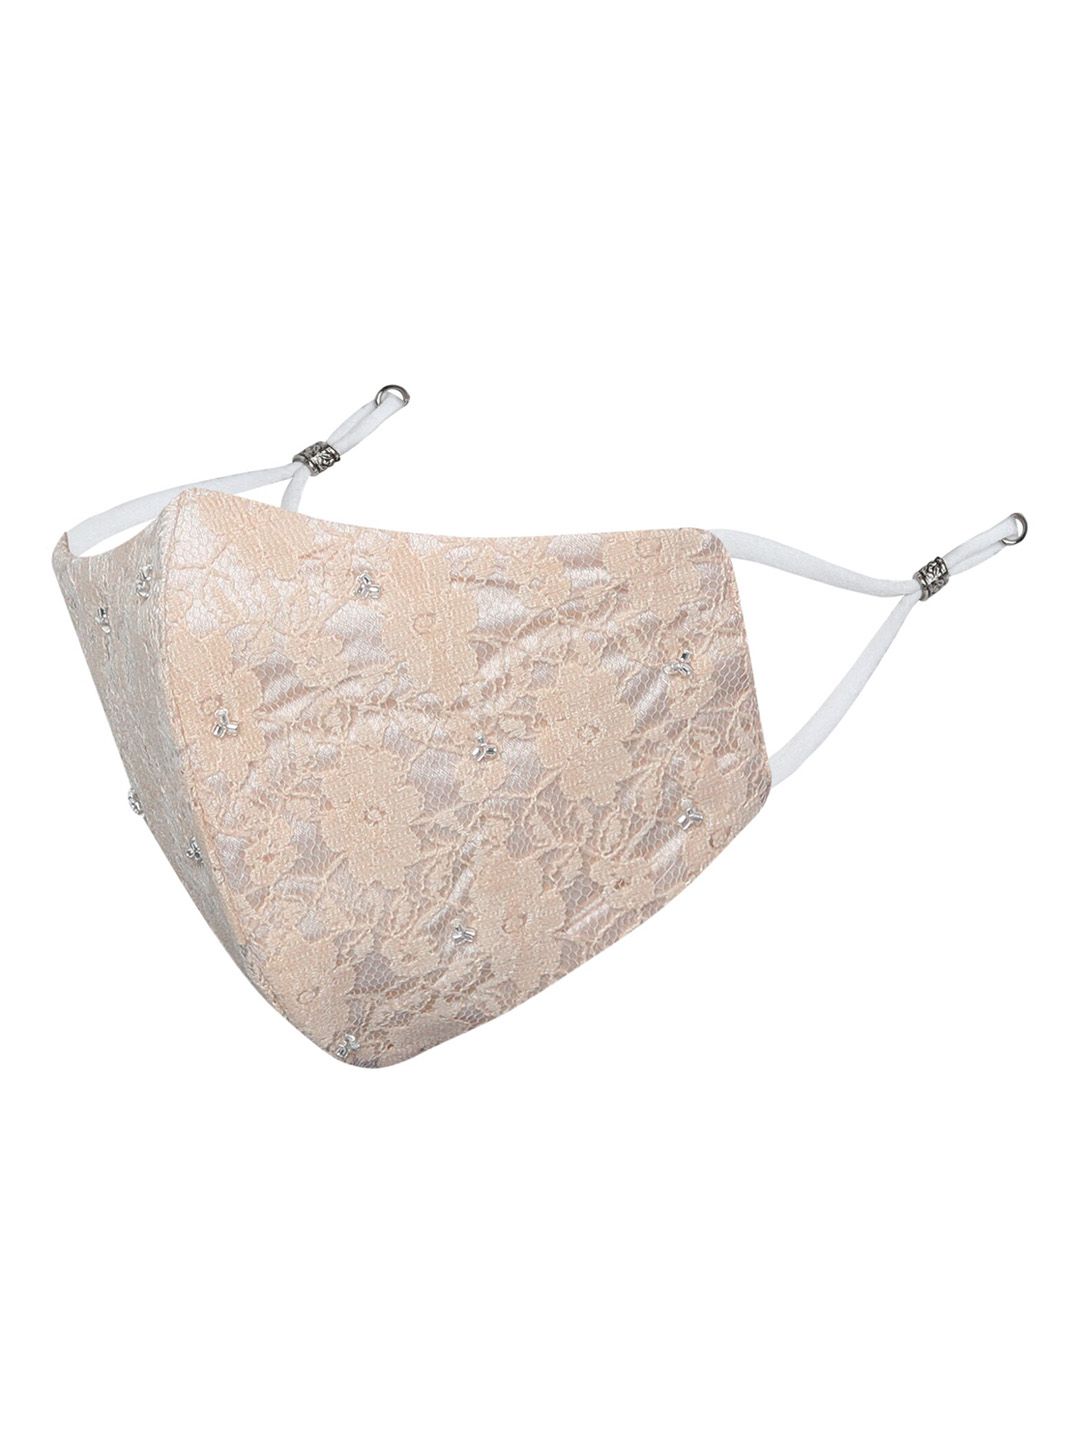 MASQ Women Peach-Coloured Lace 4-Ply Reusable Cloth Mask with Beaded Detail Price in India